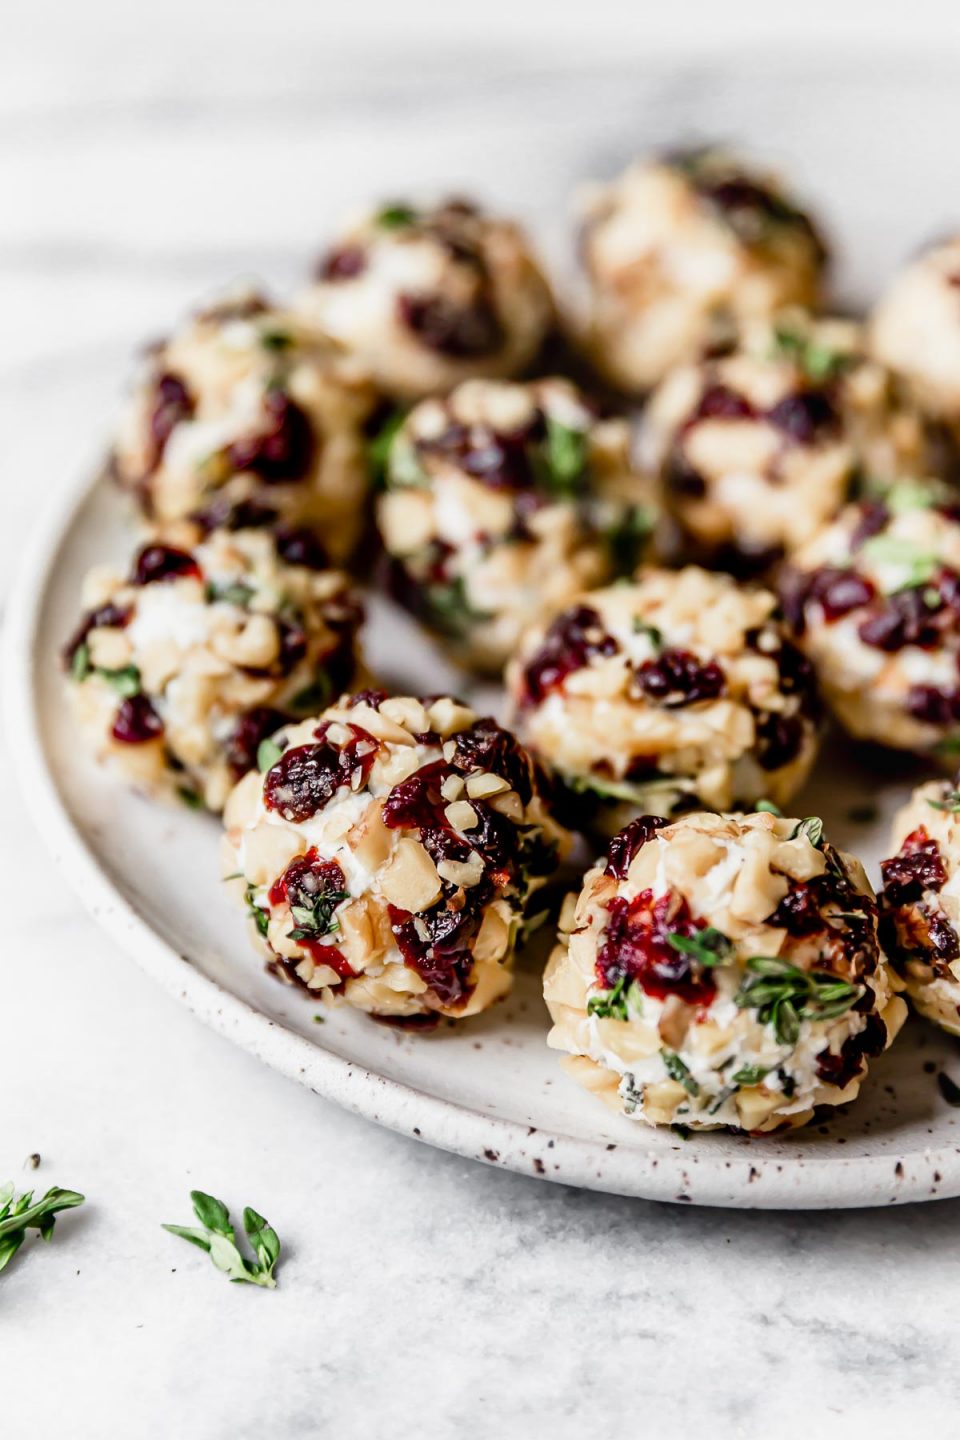 Herbed goat cheese balls, coated in chopped nuts & tart cherries, on a small, speckled white plate.